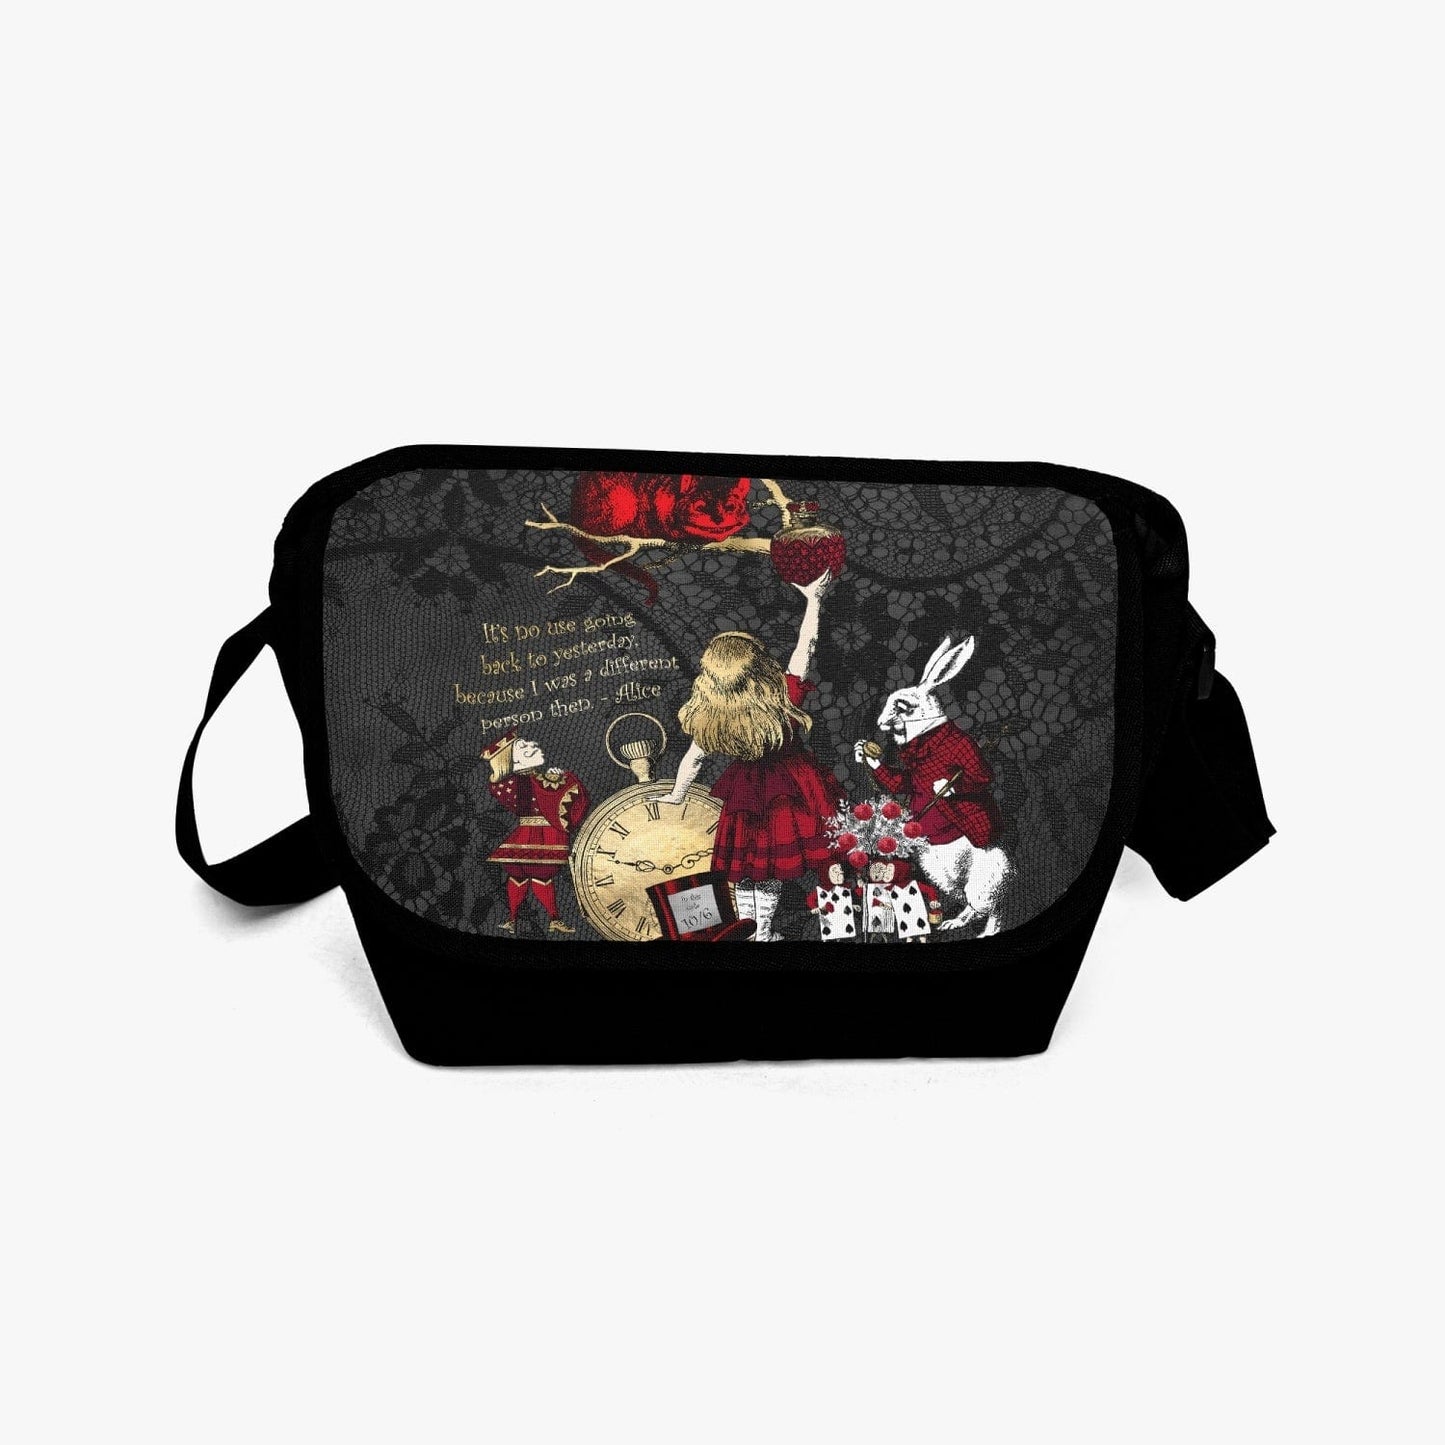 gothic Alice in Wonderland Messenger Bag made from canvas with a gothic gold, red and white Alice in Wonderland character print against a black lace print background, front view